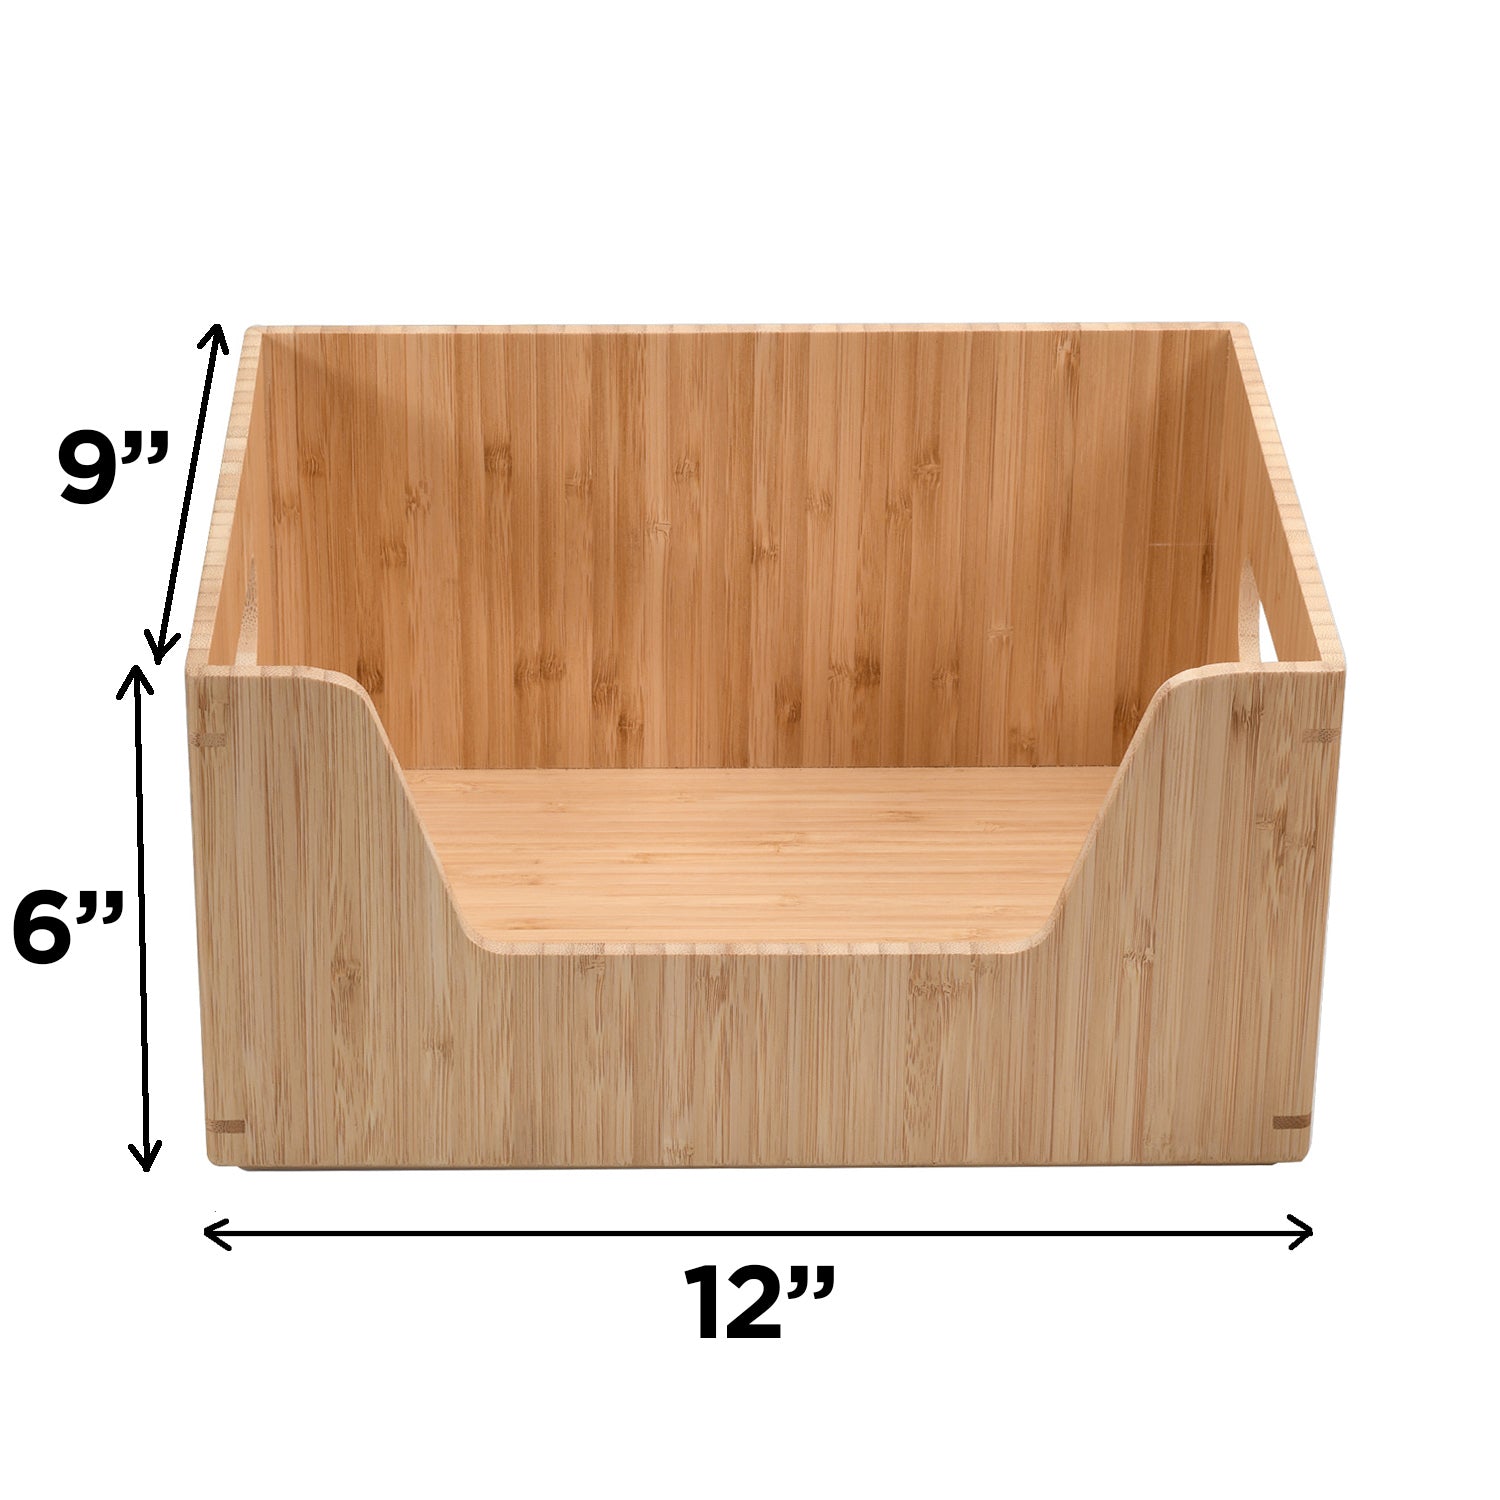 Mobilevision Bamboo Large Open Front Storage Box, 14 x 11 x 6.5